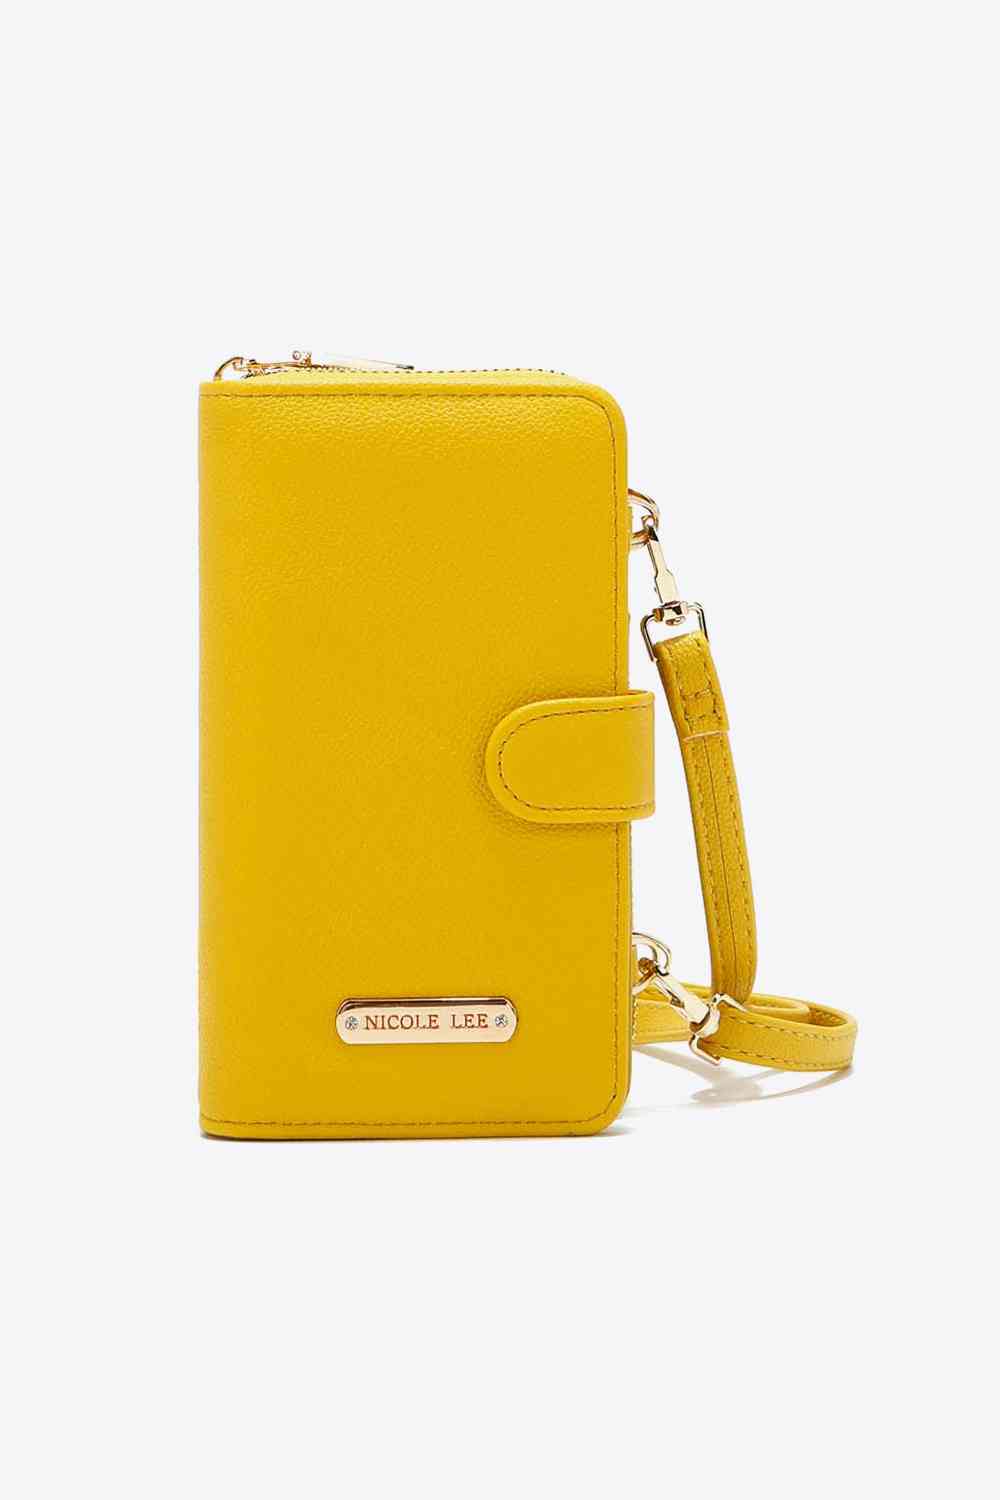 Goldenrod Nicole Lee USA Two-Piece Crossbody Phone Case Wallet Sentient Beauty Fashions Apparel &amp; Accessories